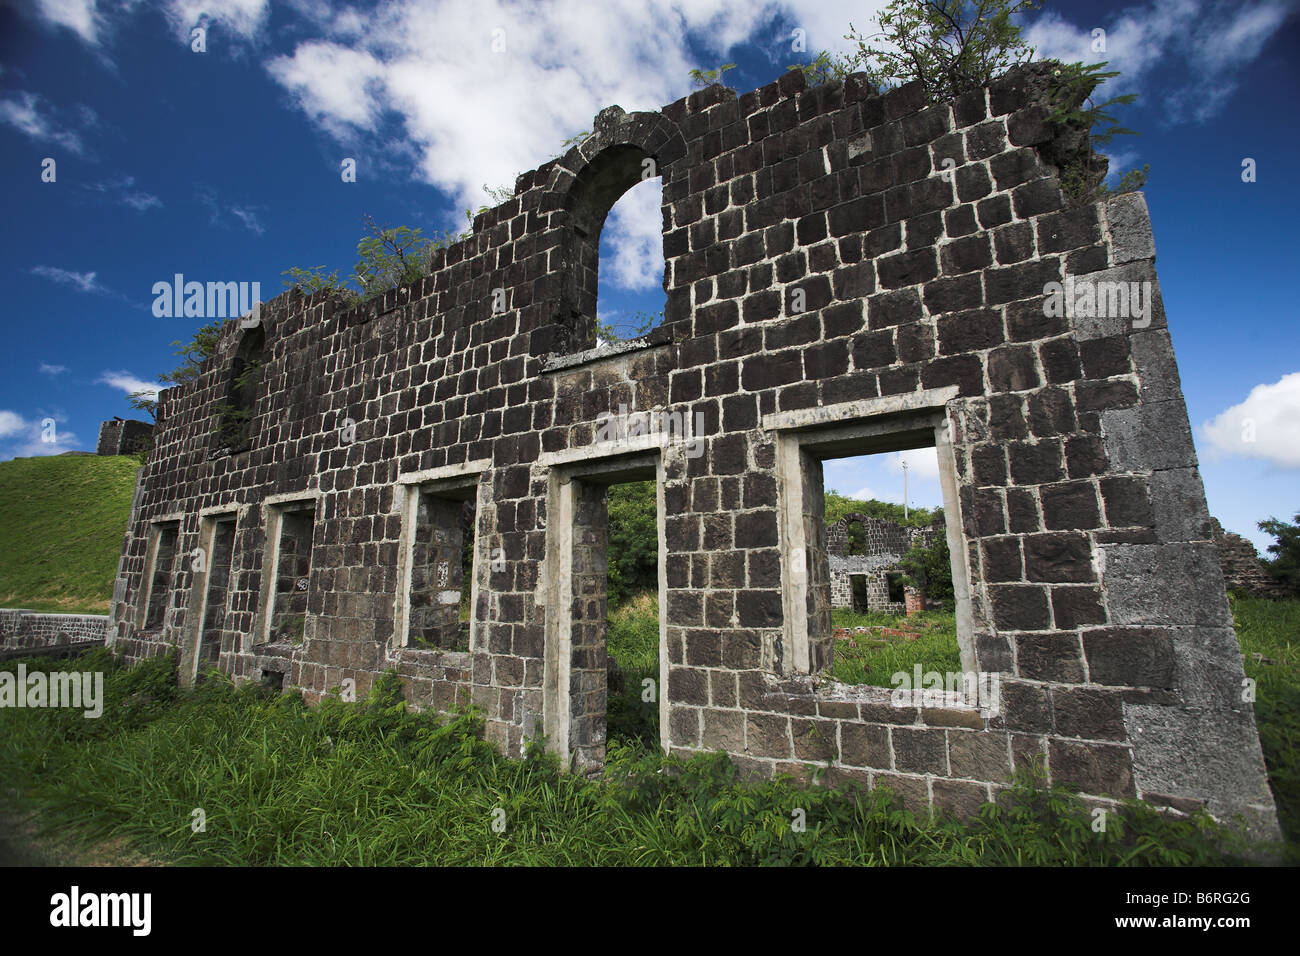 View of the old barracks at Brimstone Hill Fortress at St Kitts in the Caribbean, West Indies. Stock Photo